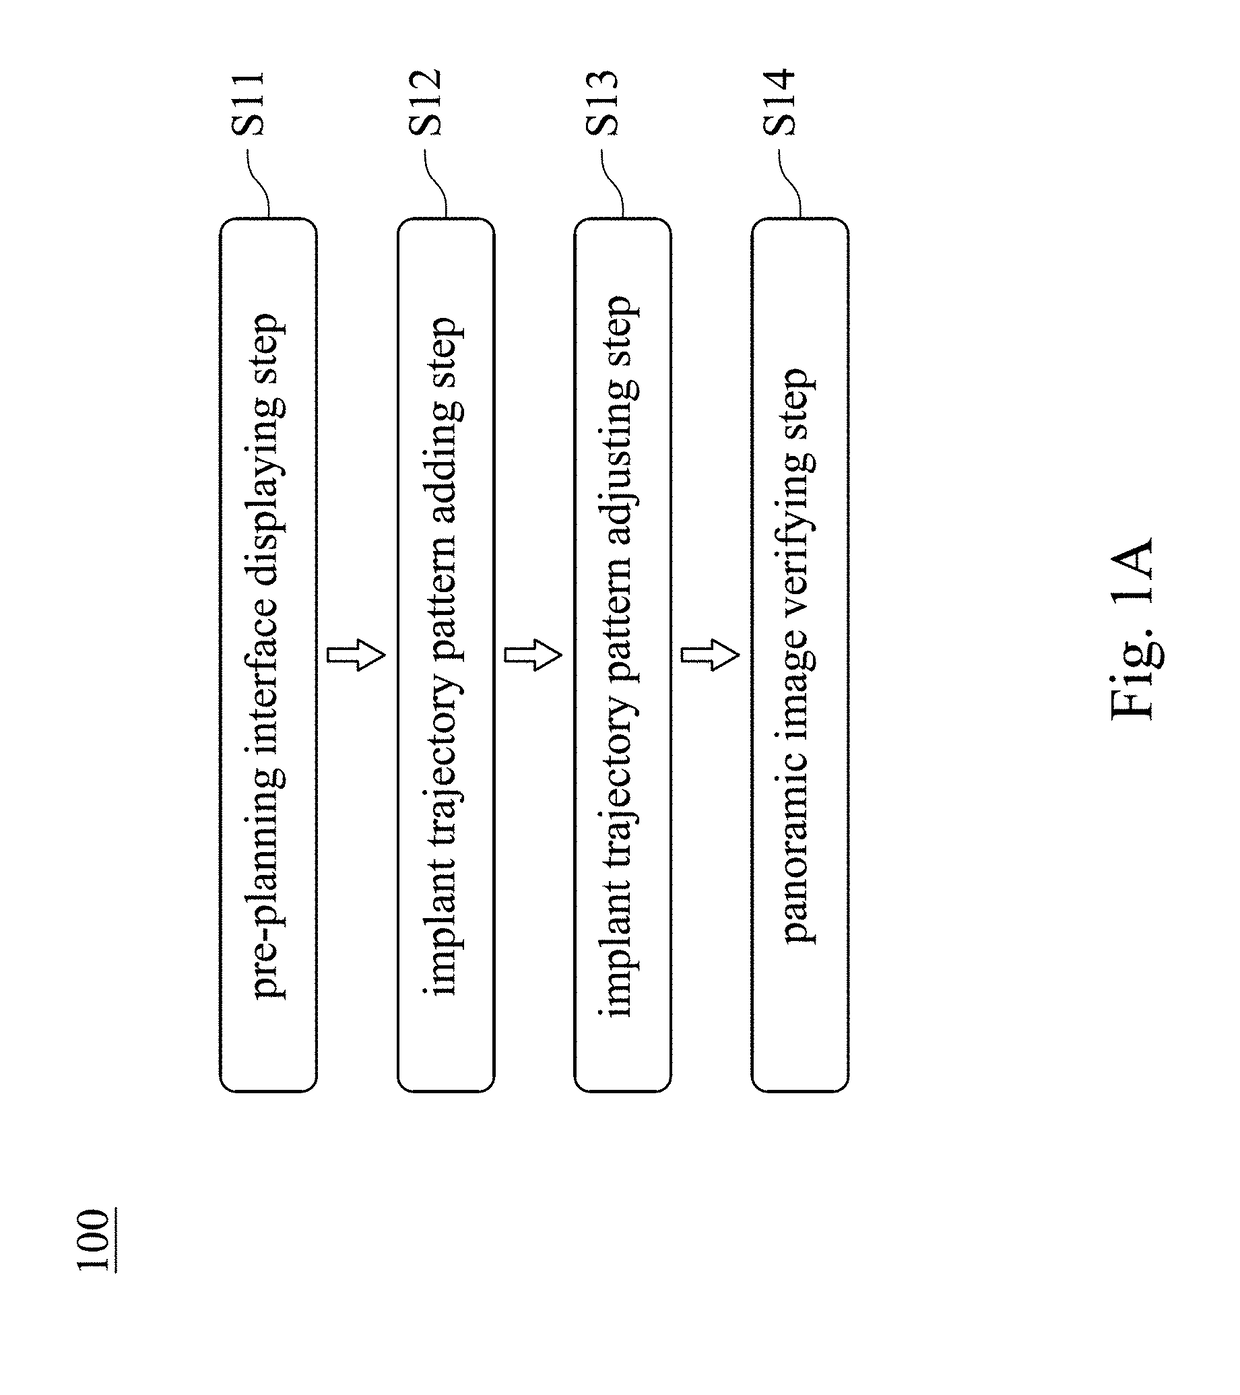 Method and system for verifying panoramic images of implants